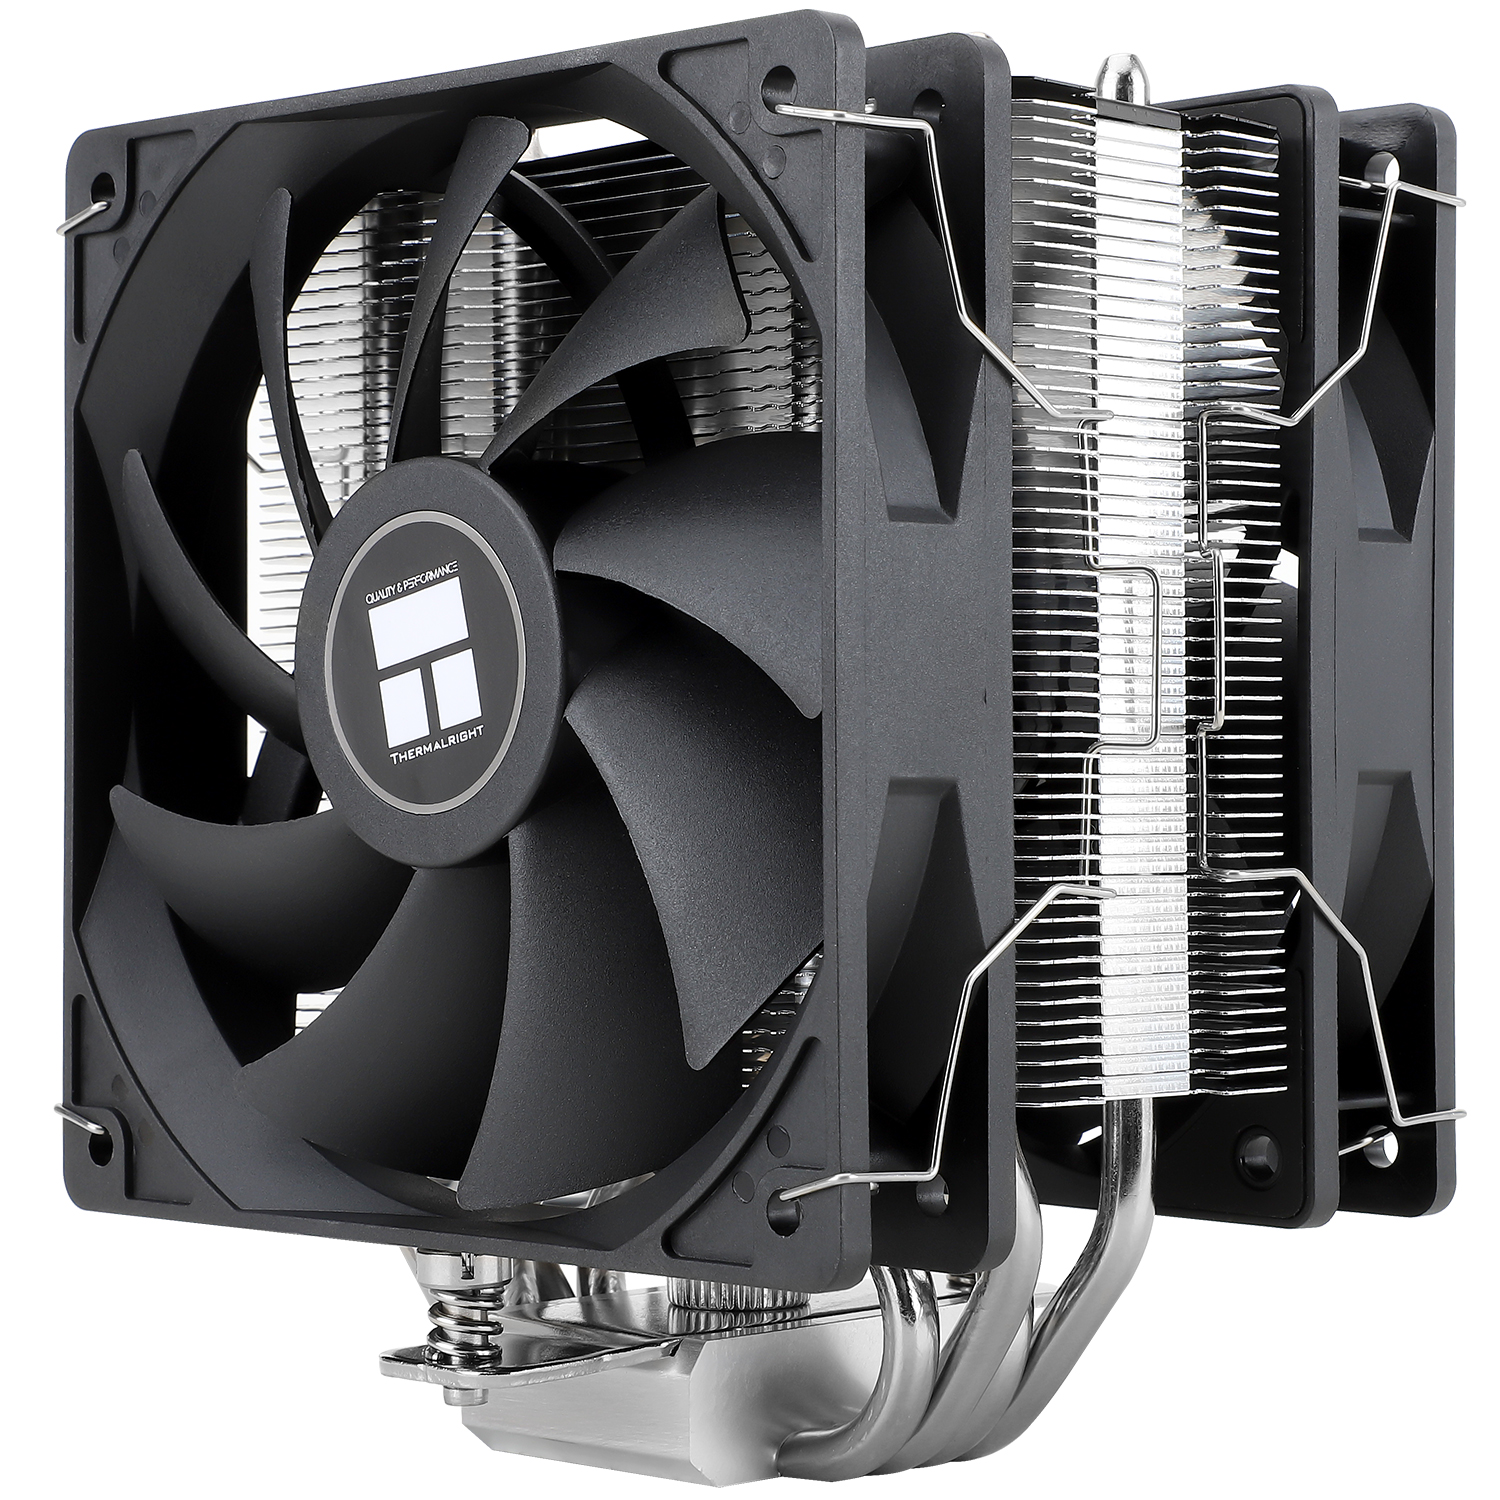 Thermalright Assassin X 120 R SE CPU Cooler Black